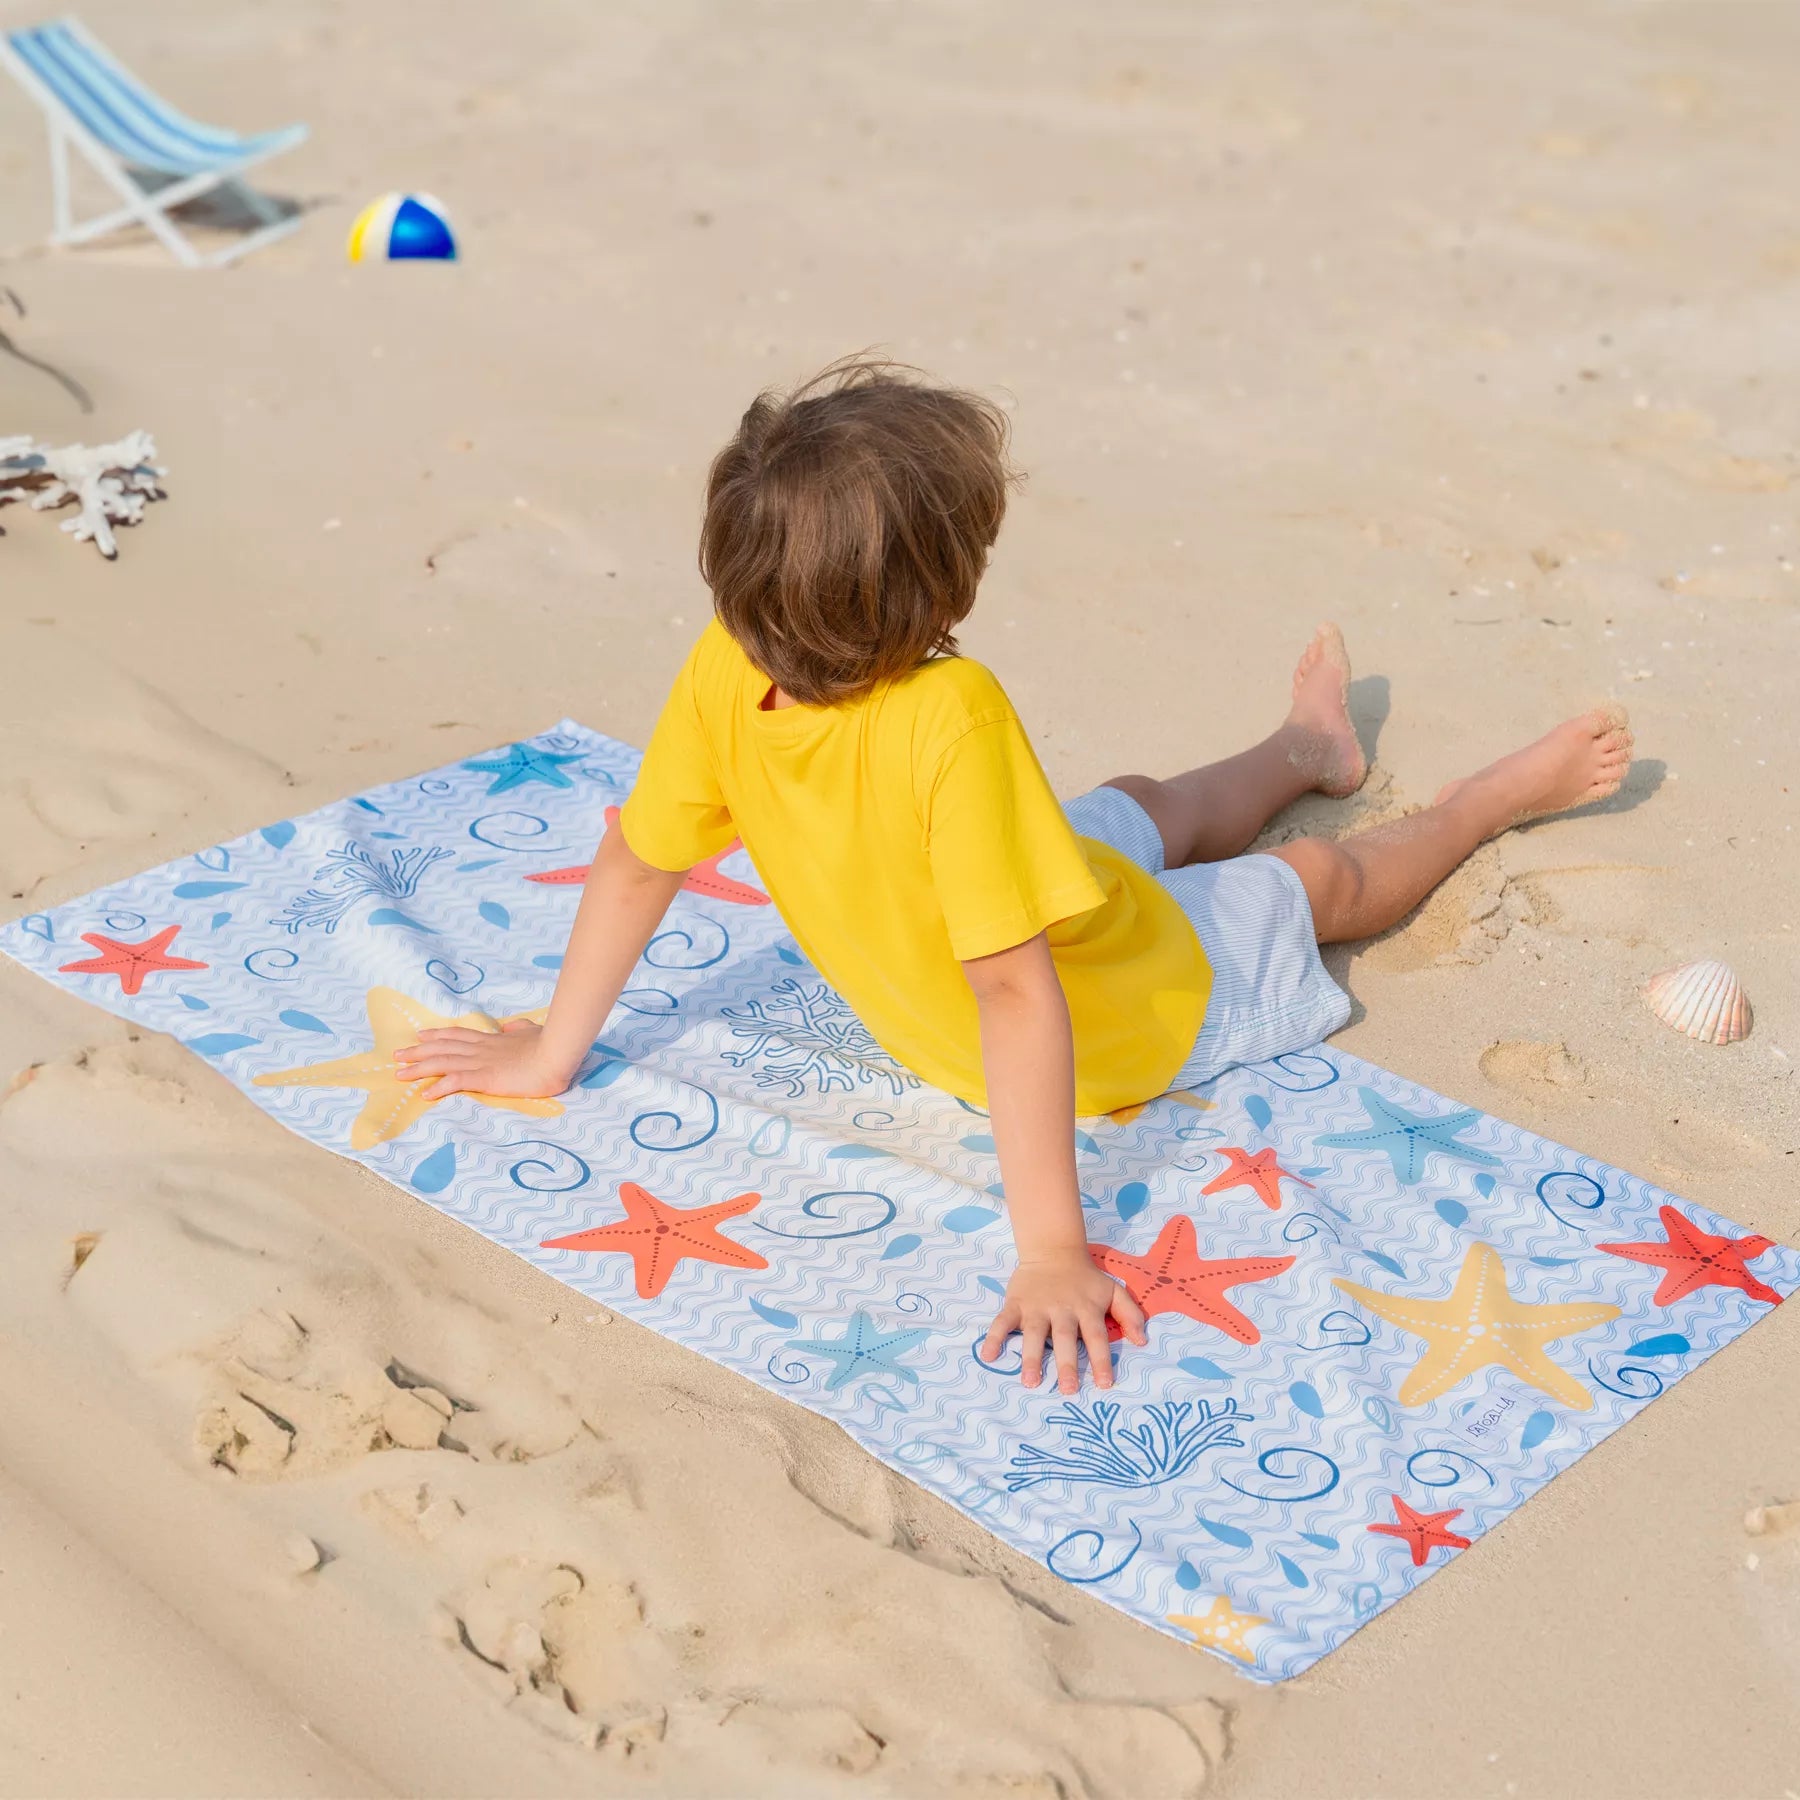 A boy sitting on the sand on a Quick Dry, Sand Free, Light Weight, Compact and Ecofriendly Microfiber Beach Towel from La Toalla designed for kids